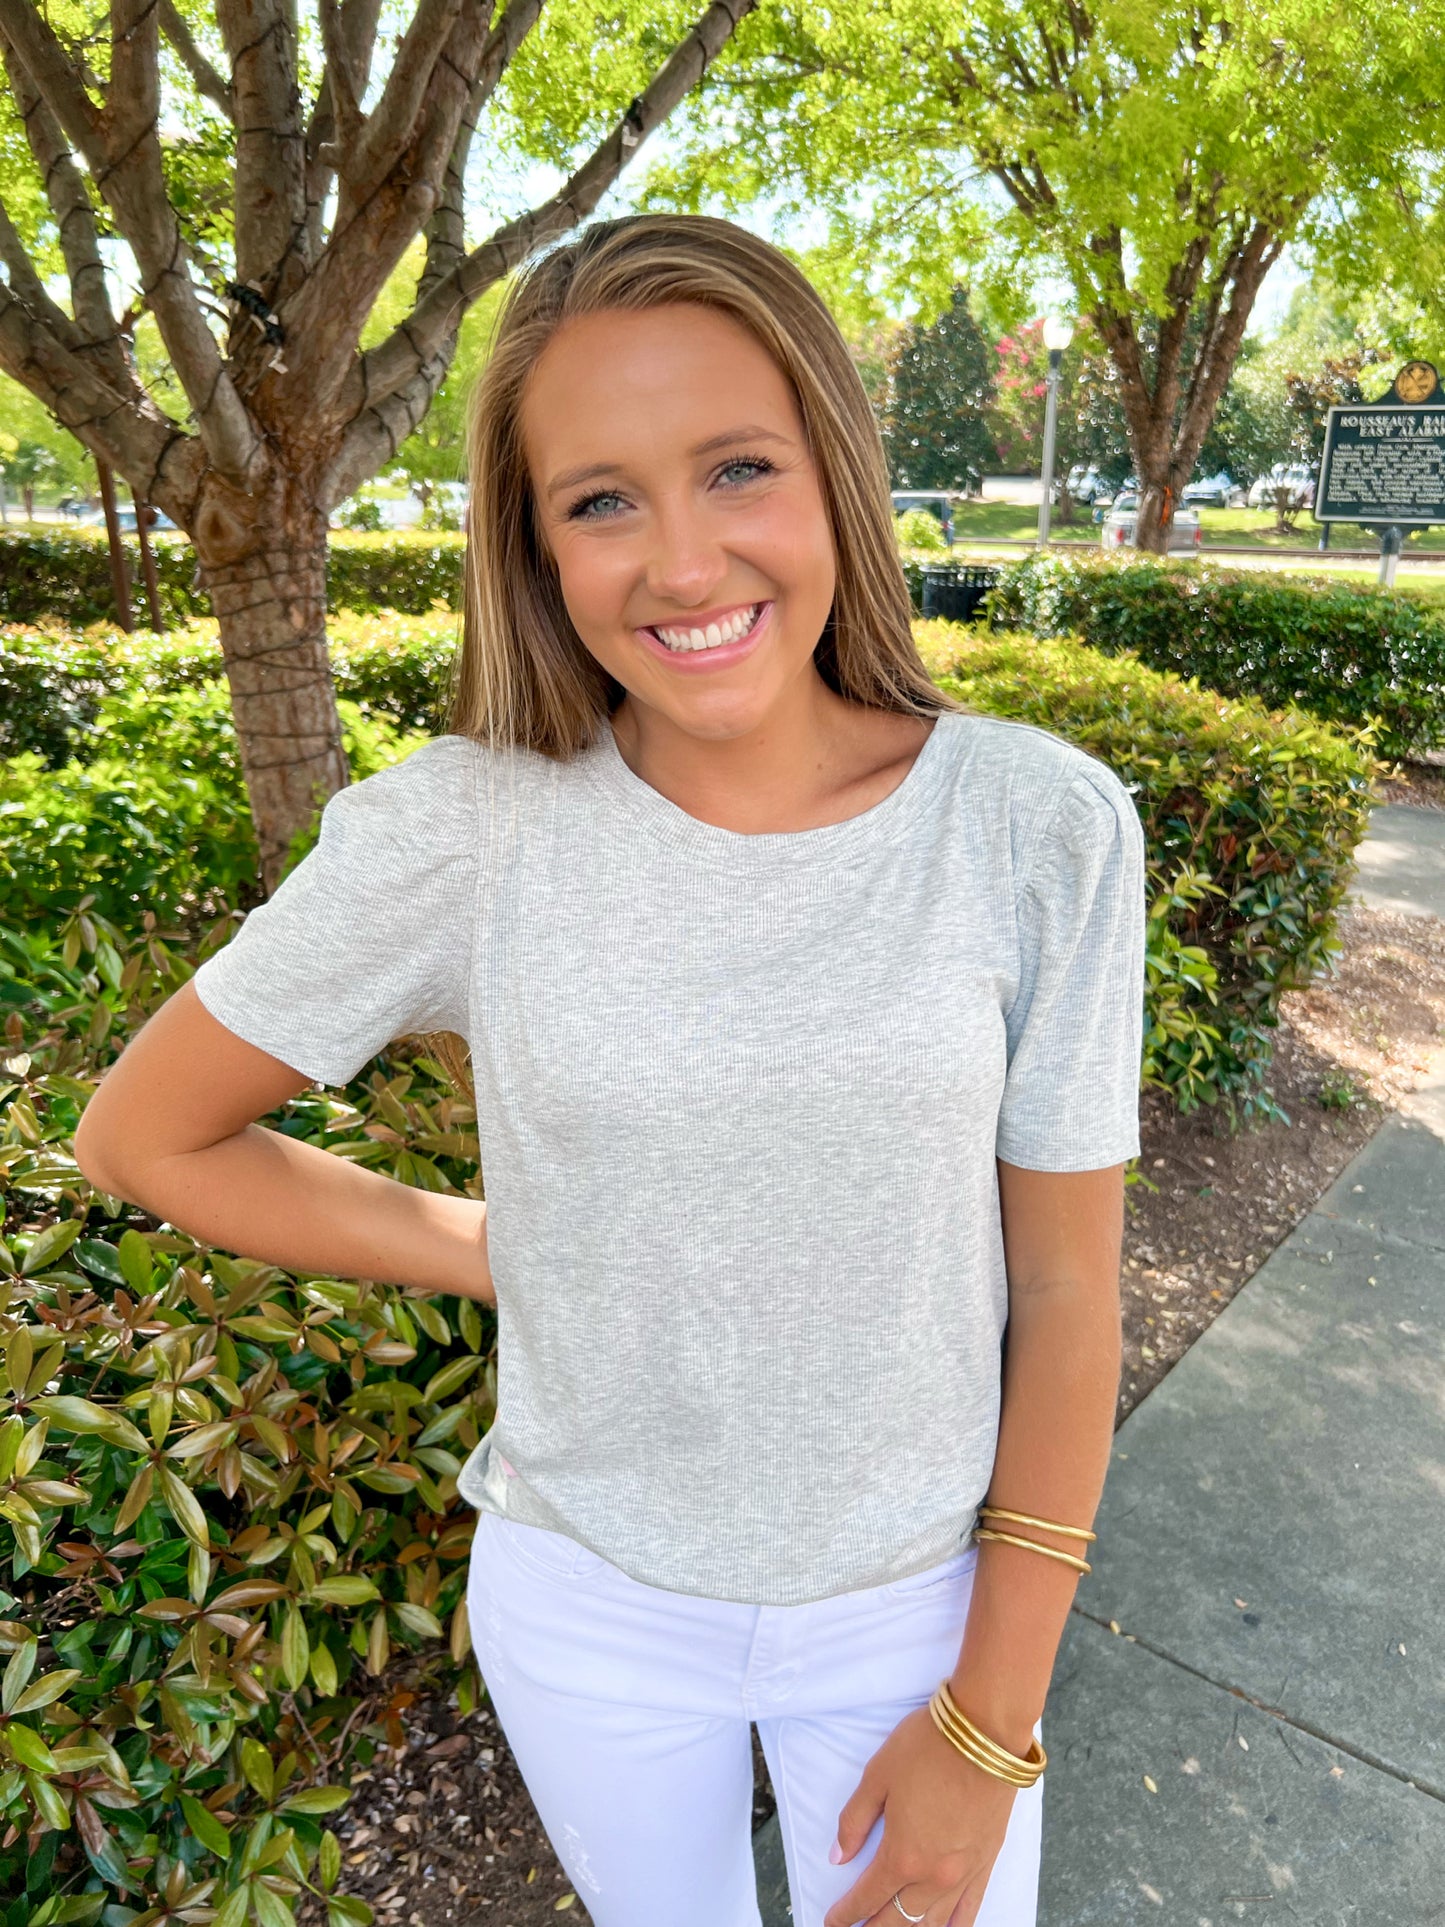 The Siena Top in Heather Gray